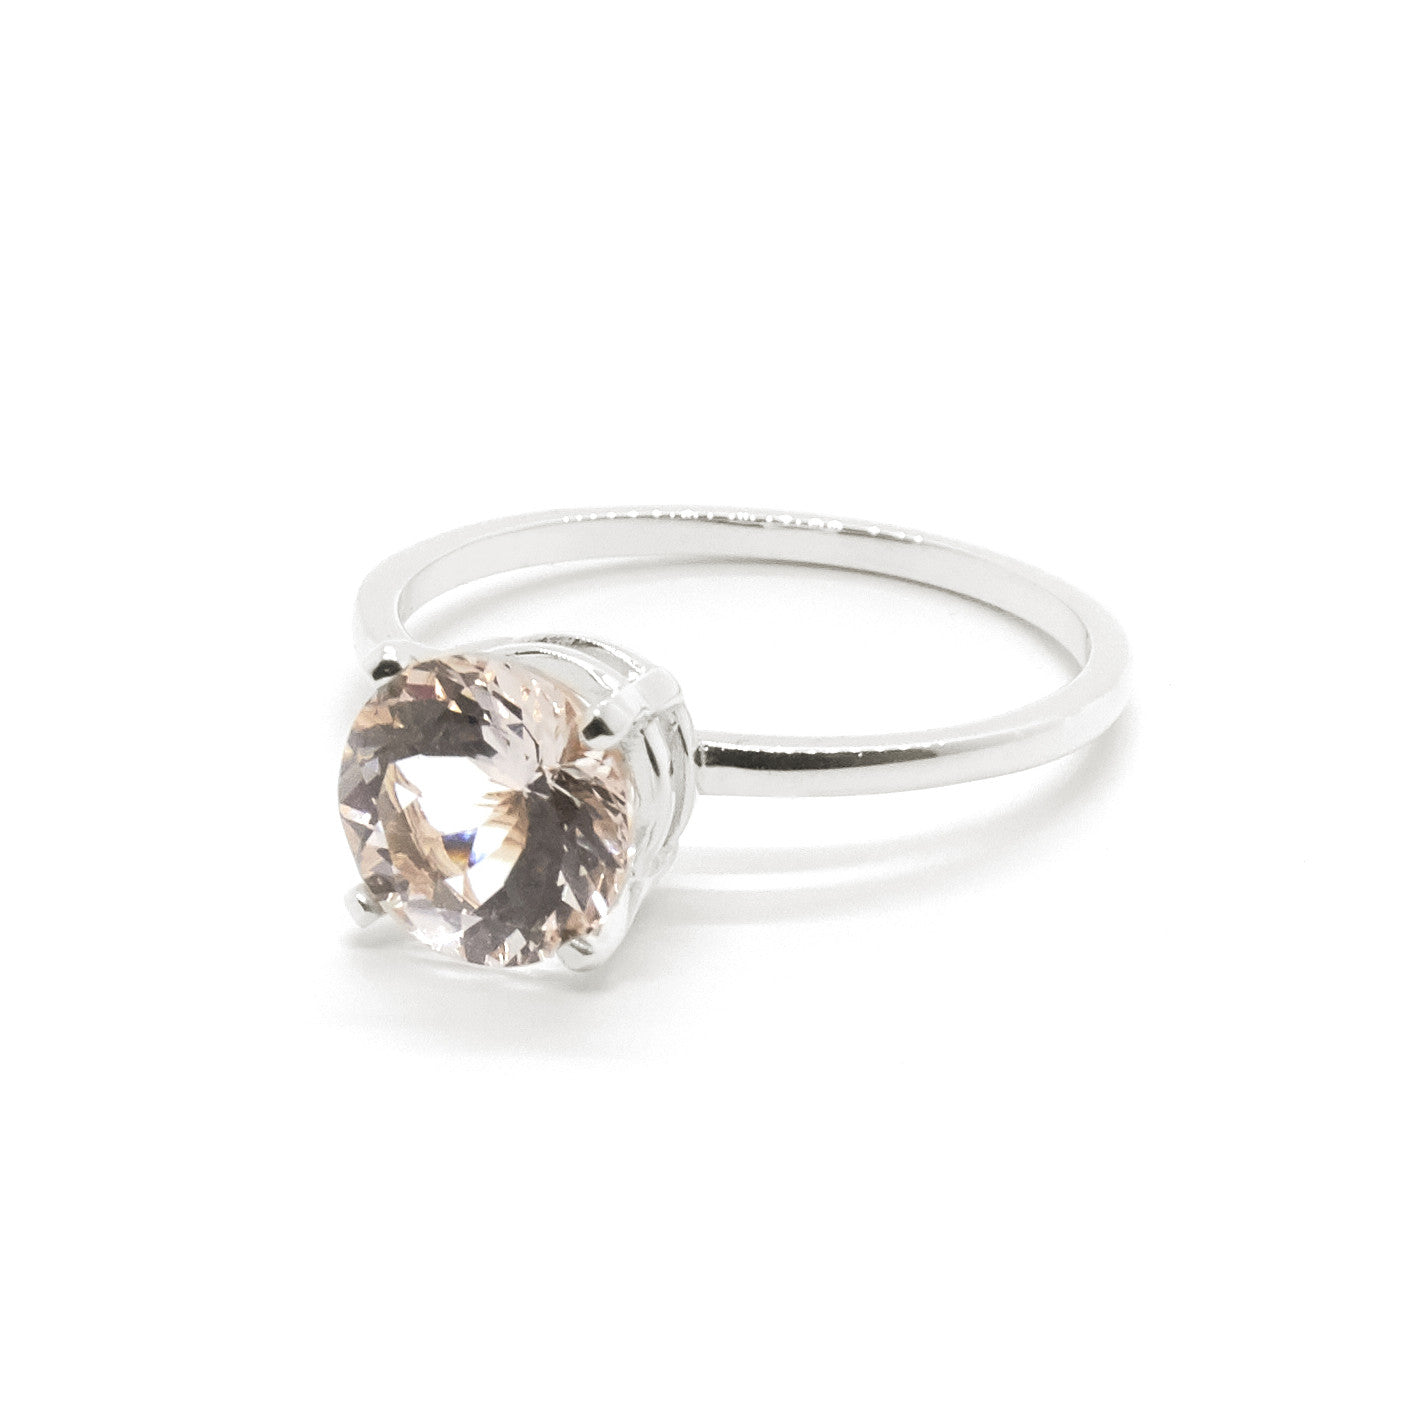 The Precious Morganite Engagement Ring in Rose Gold with a round cut light pink morganite shown from a slight angle.